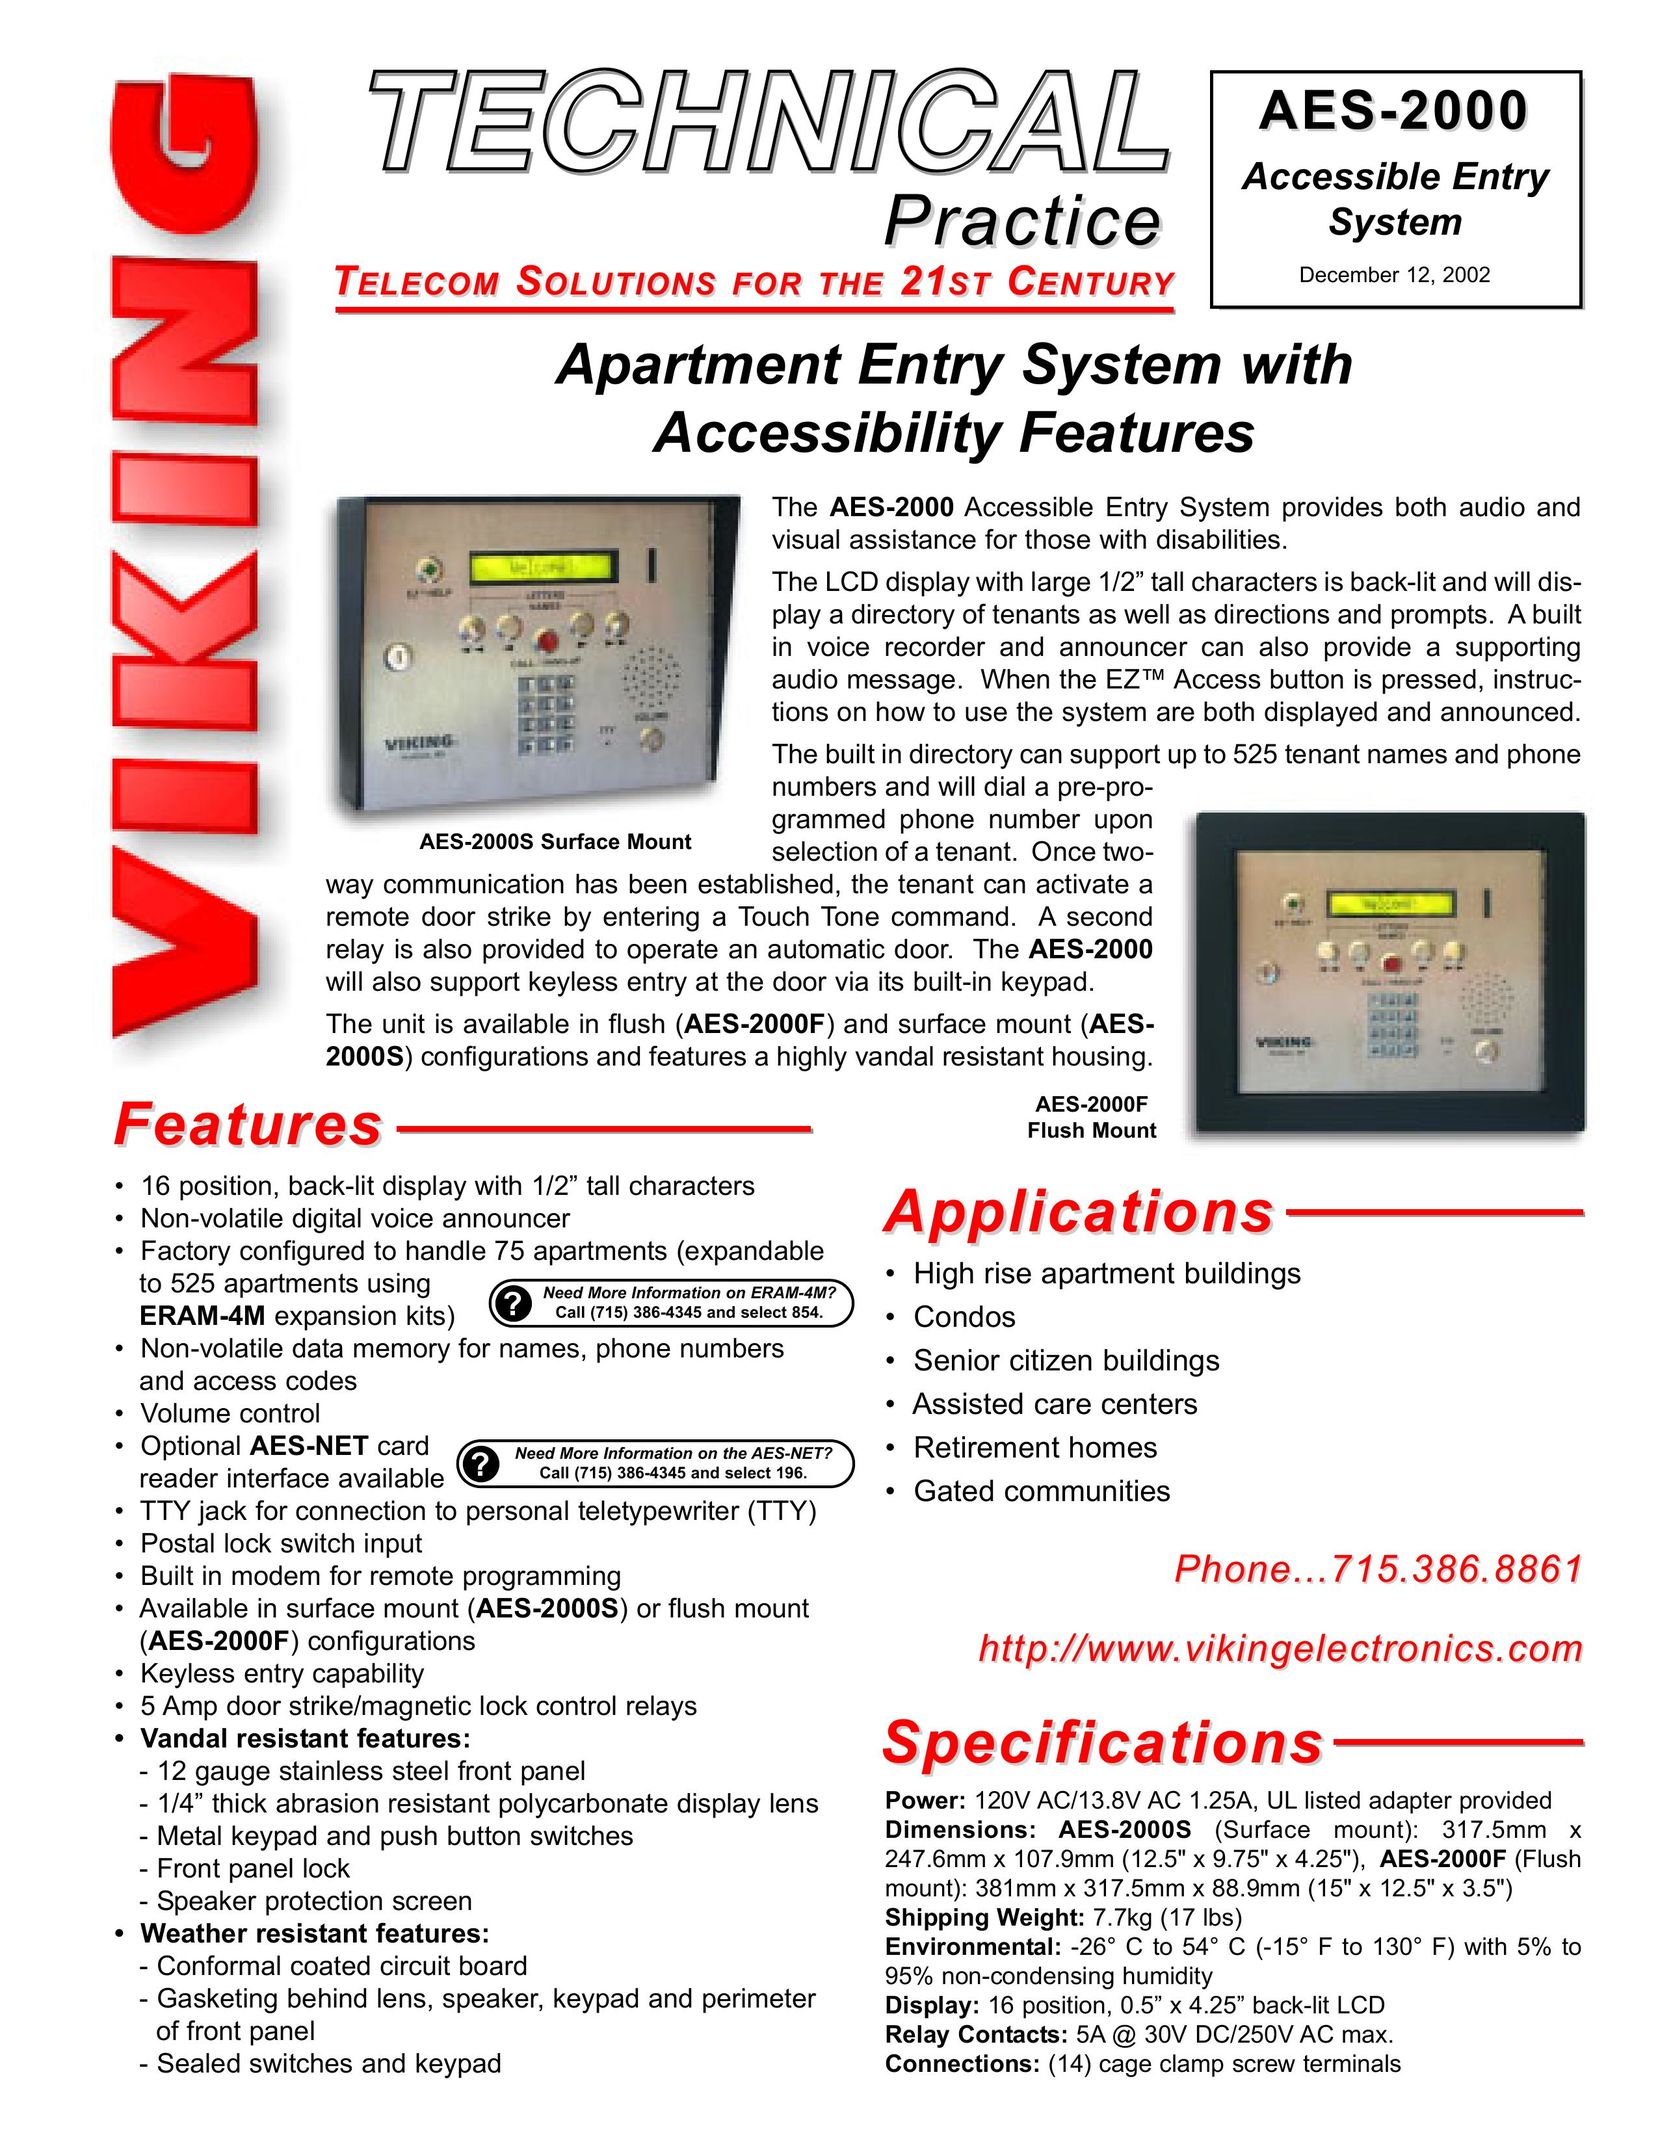 Viking the aes-2000 accessible entry system Home Security System User Manual